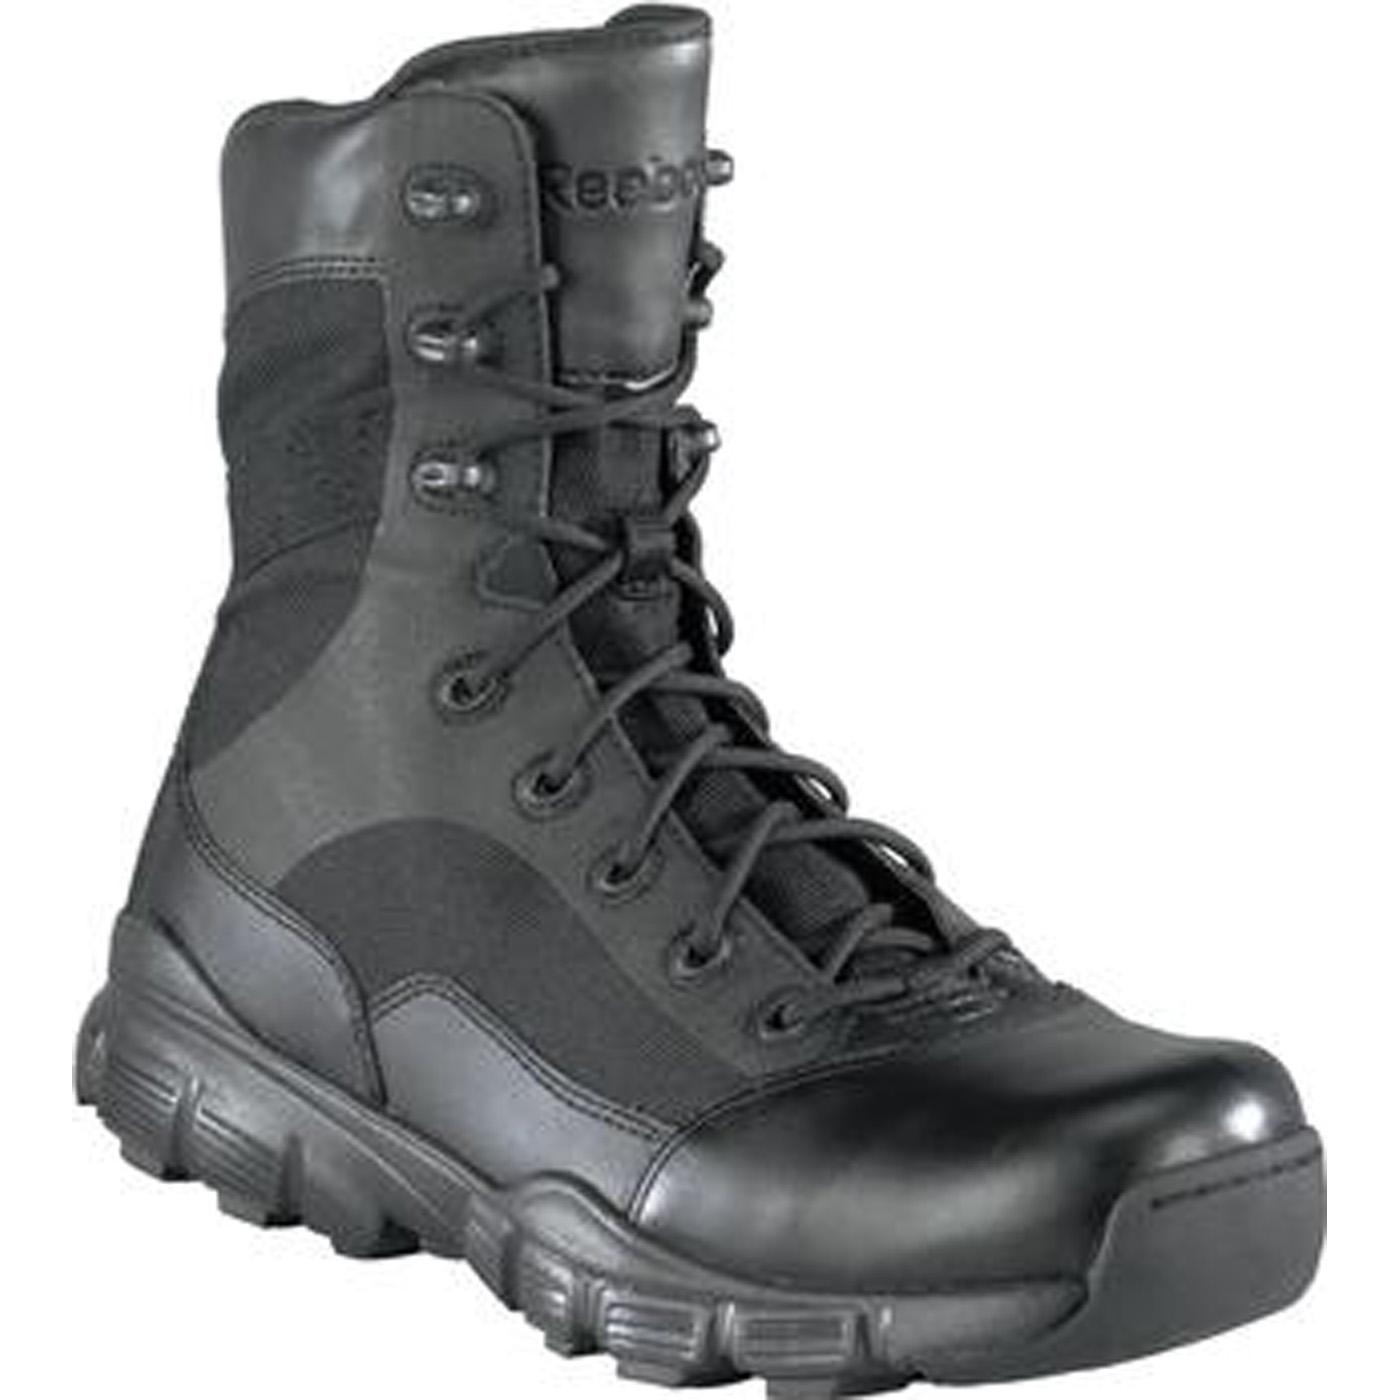 Reebok Tactical Seamless Duty Boot with Side Zipper, #RB8827